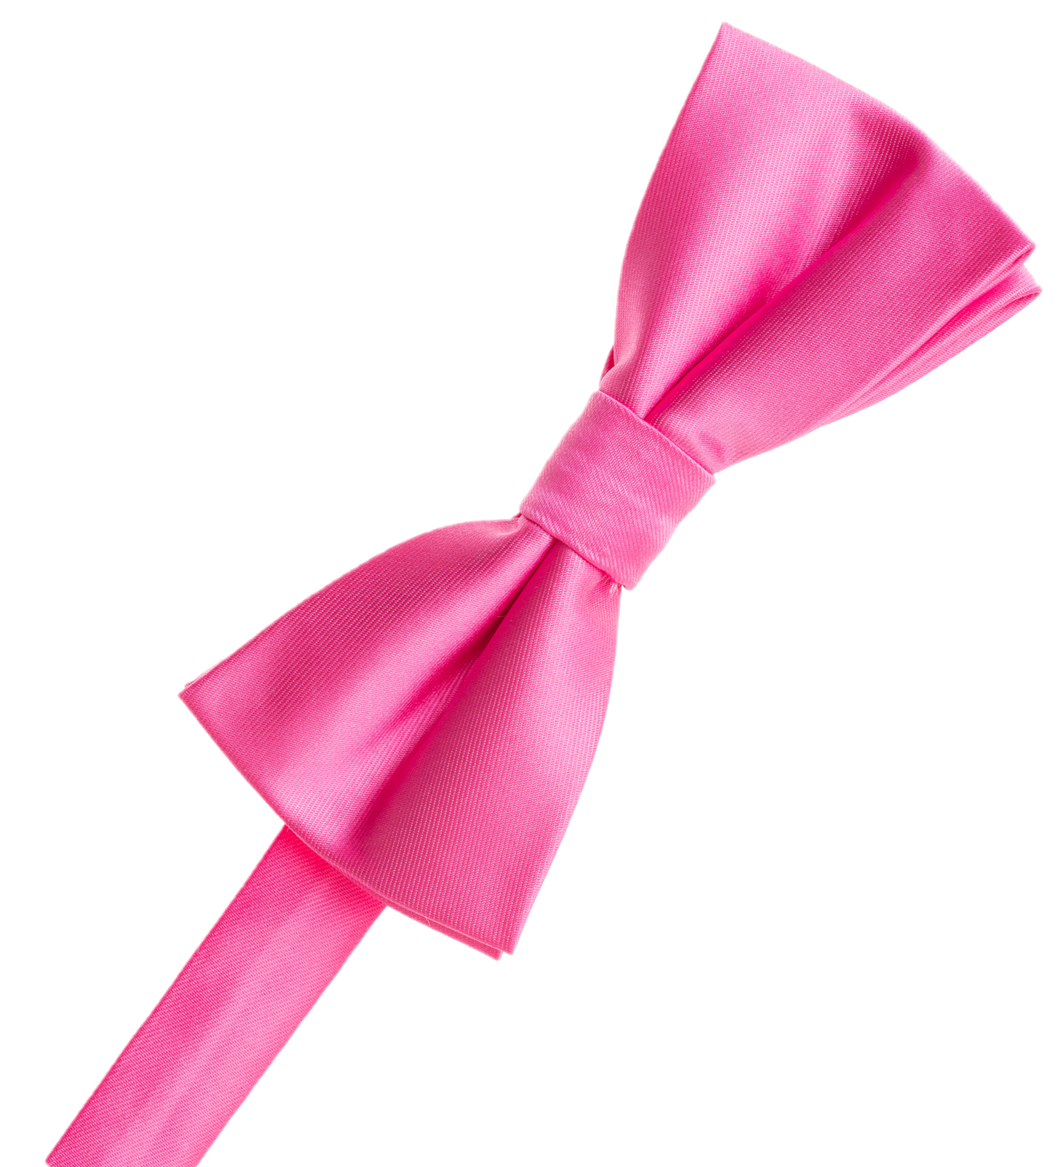 Hot Pink Bow Tie